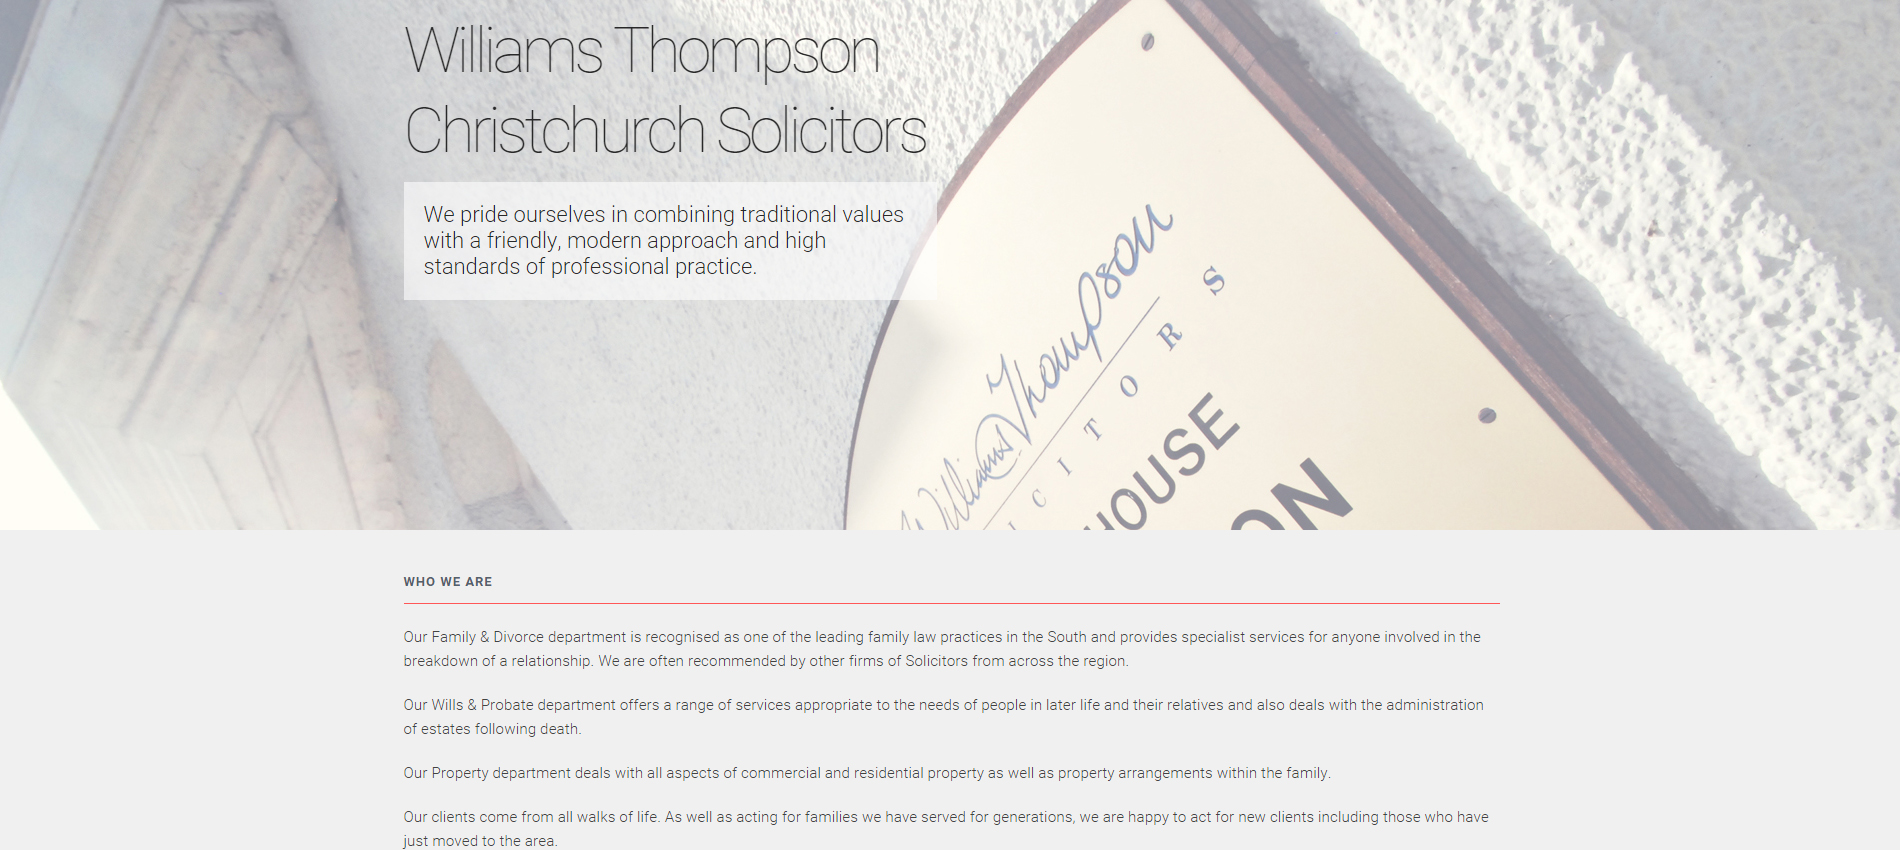 Williams Thompson Solicitors Website Launch